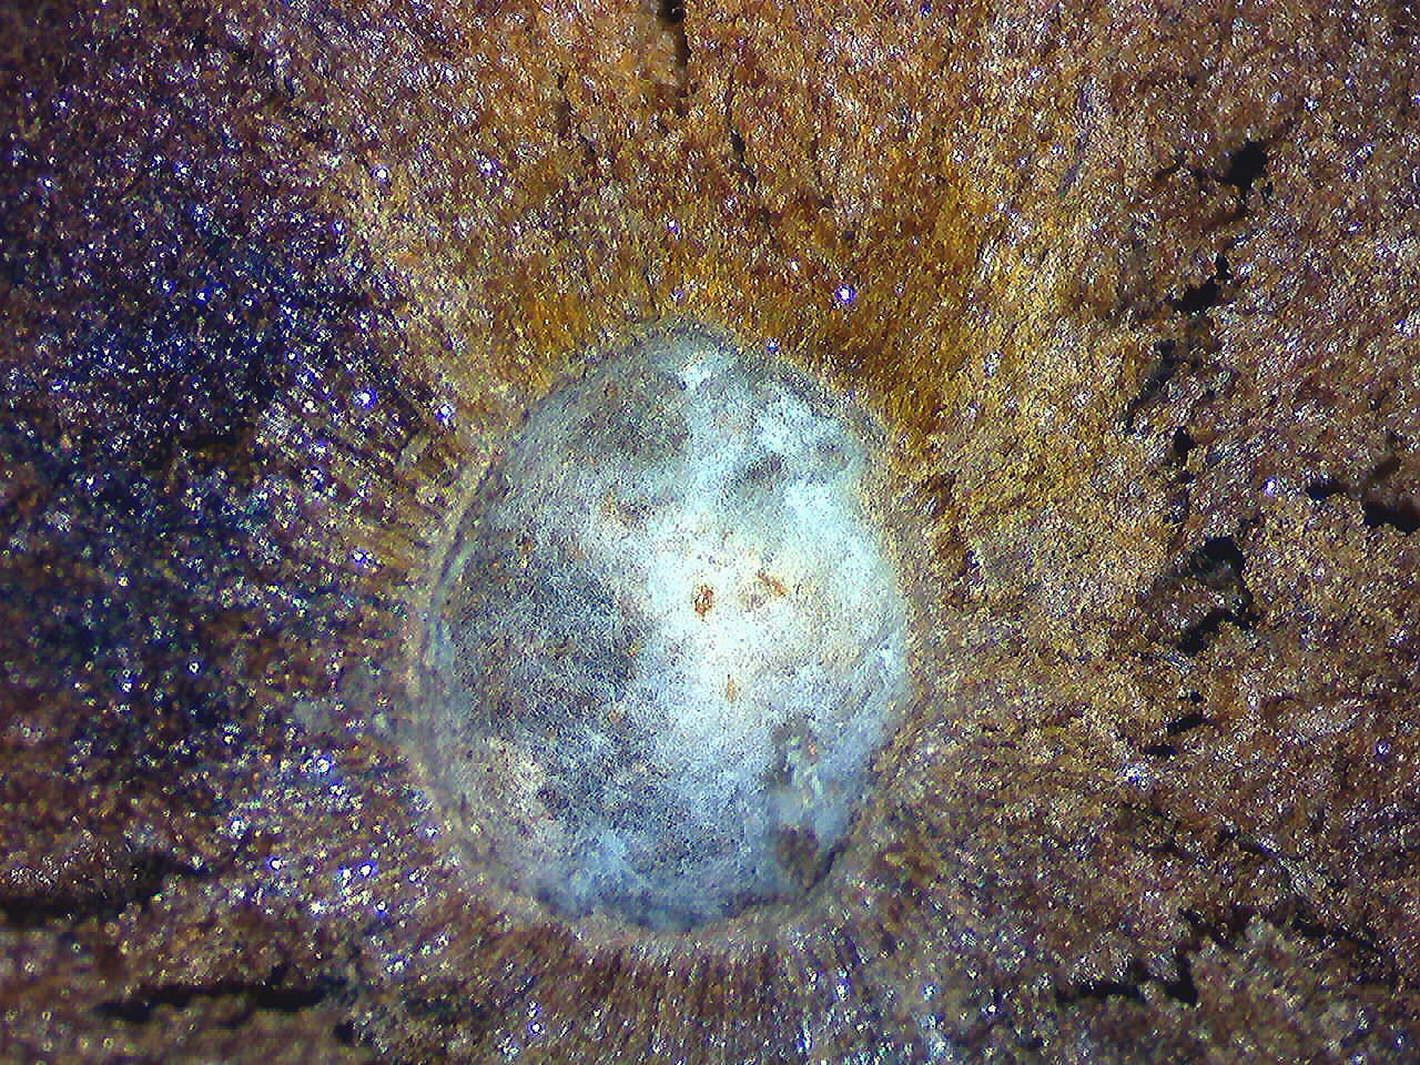 the very core of an oak apple (through a microscope)